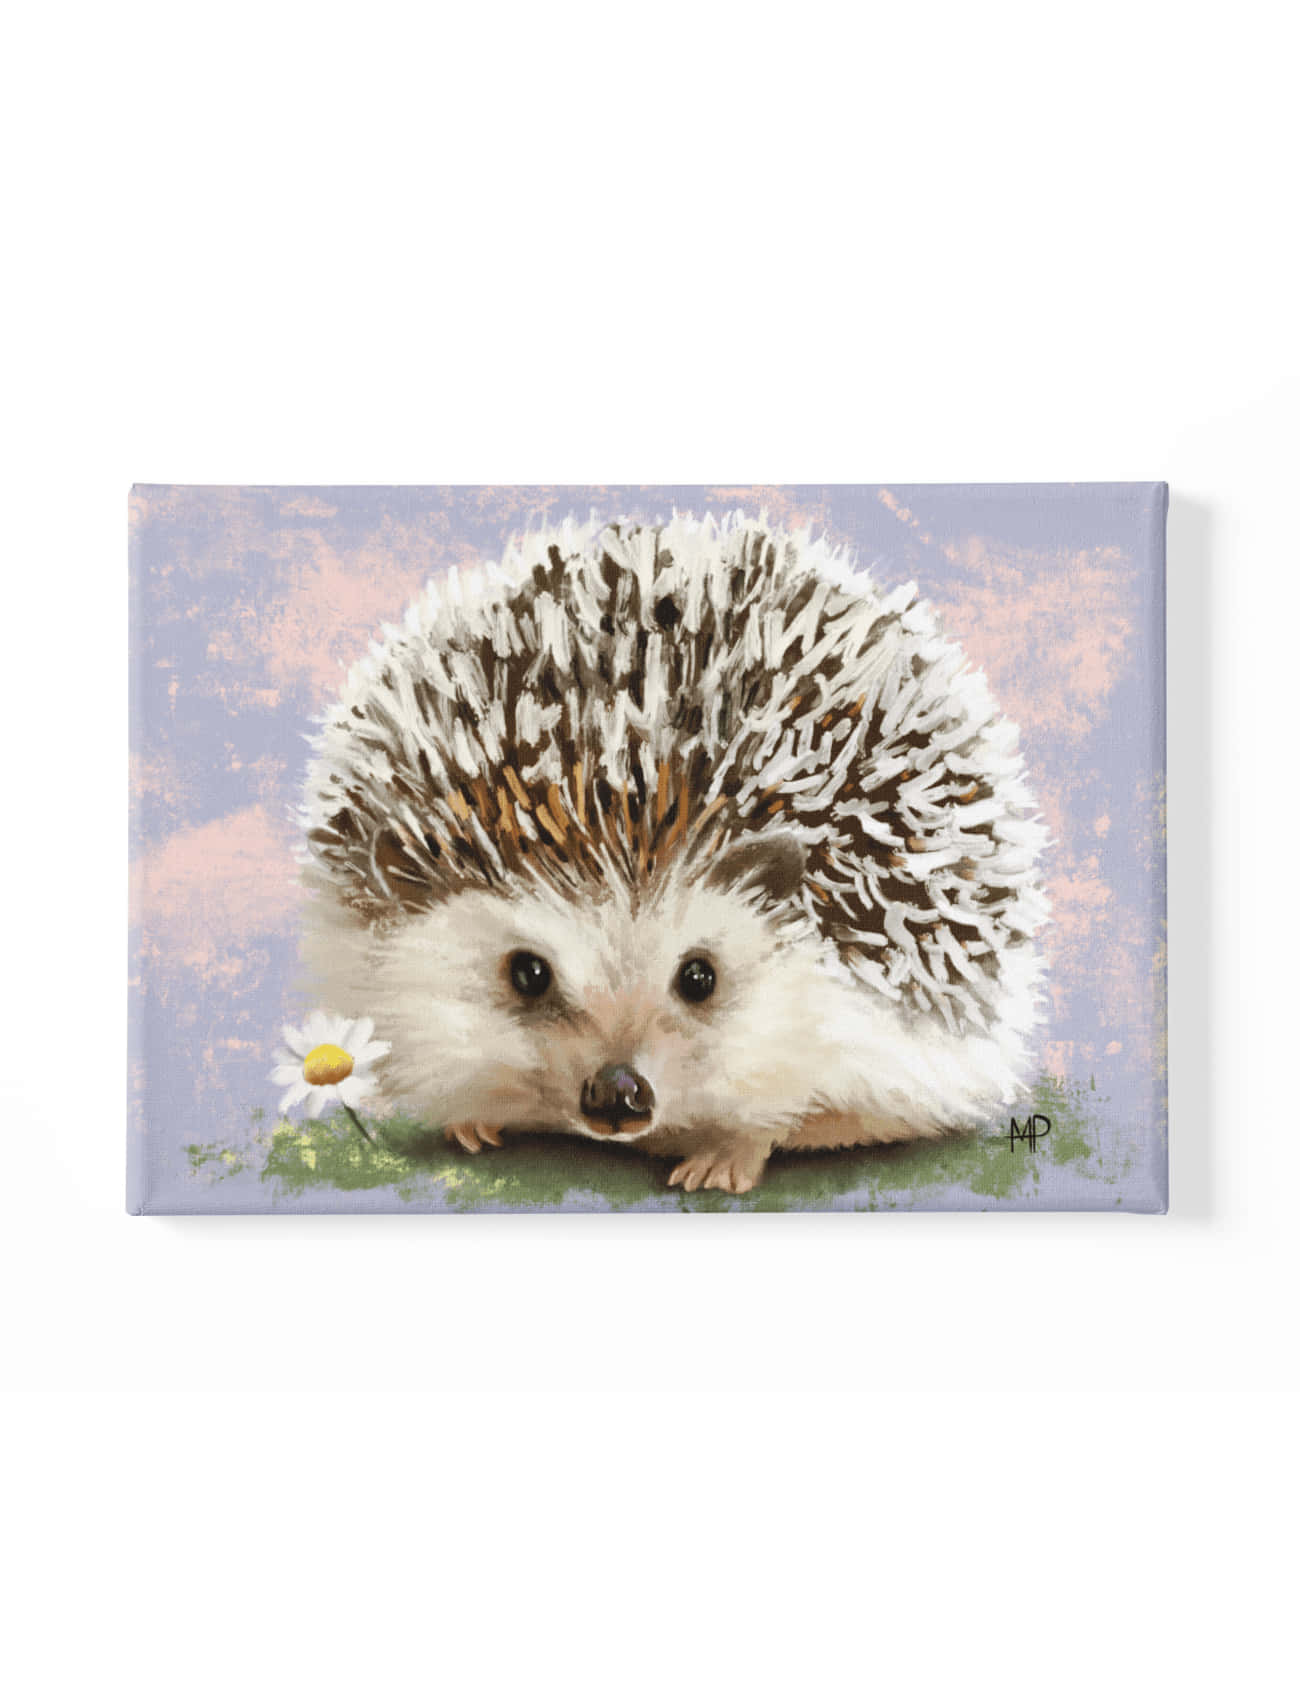 Captivating Cuddly Hedgehog - The Epitome of Cuteness!